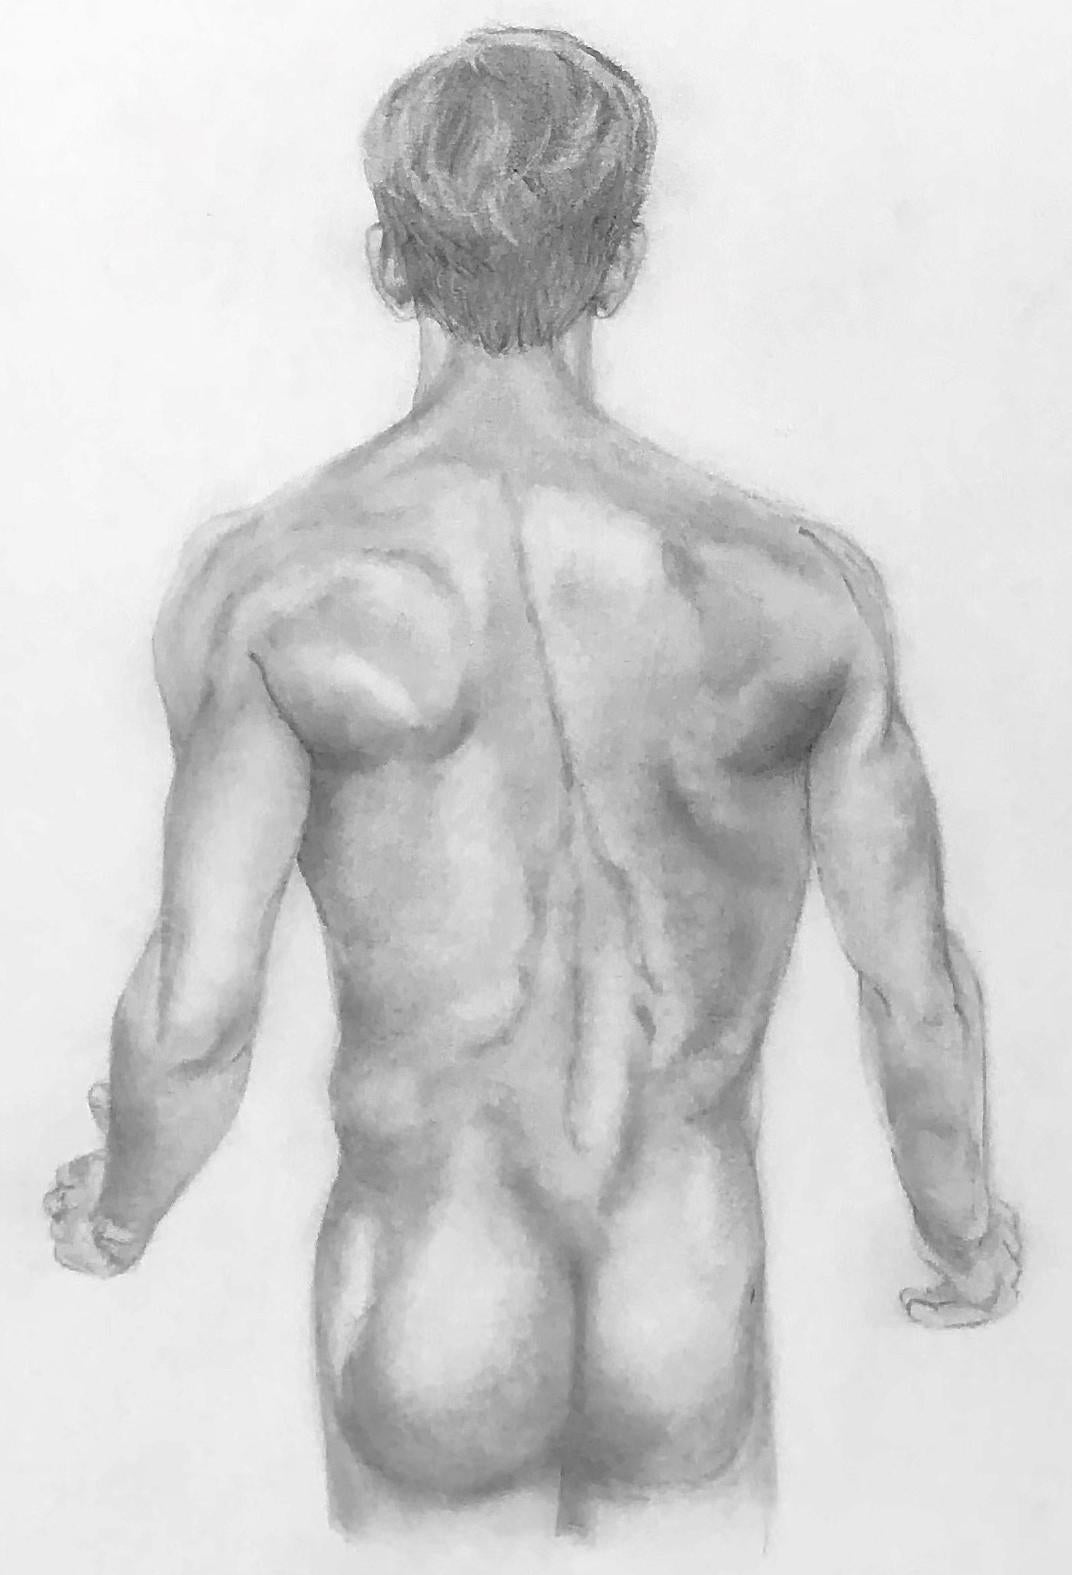 how to draw a muscular male body